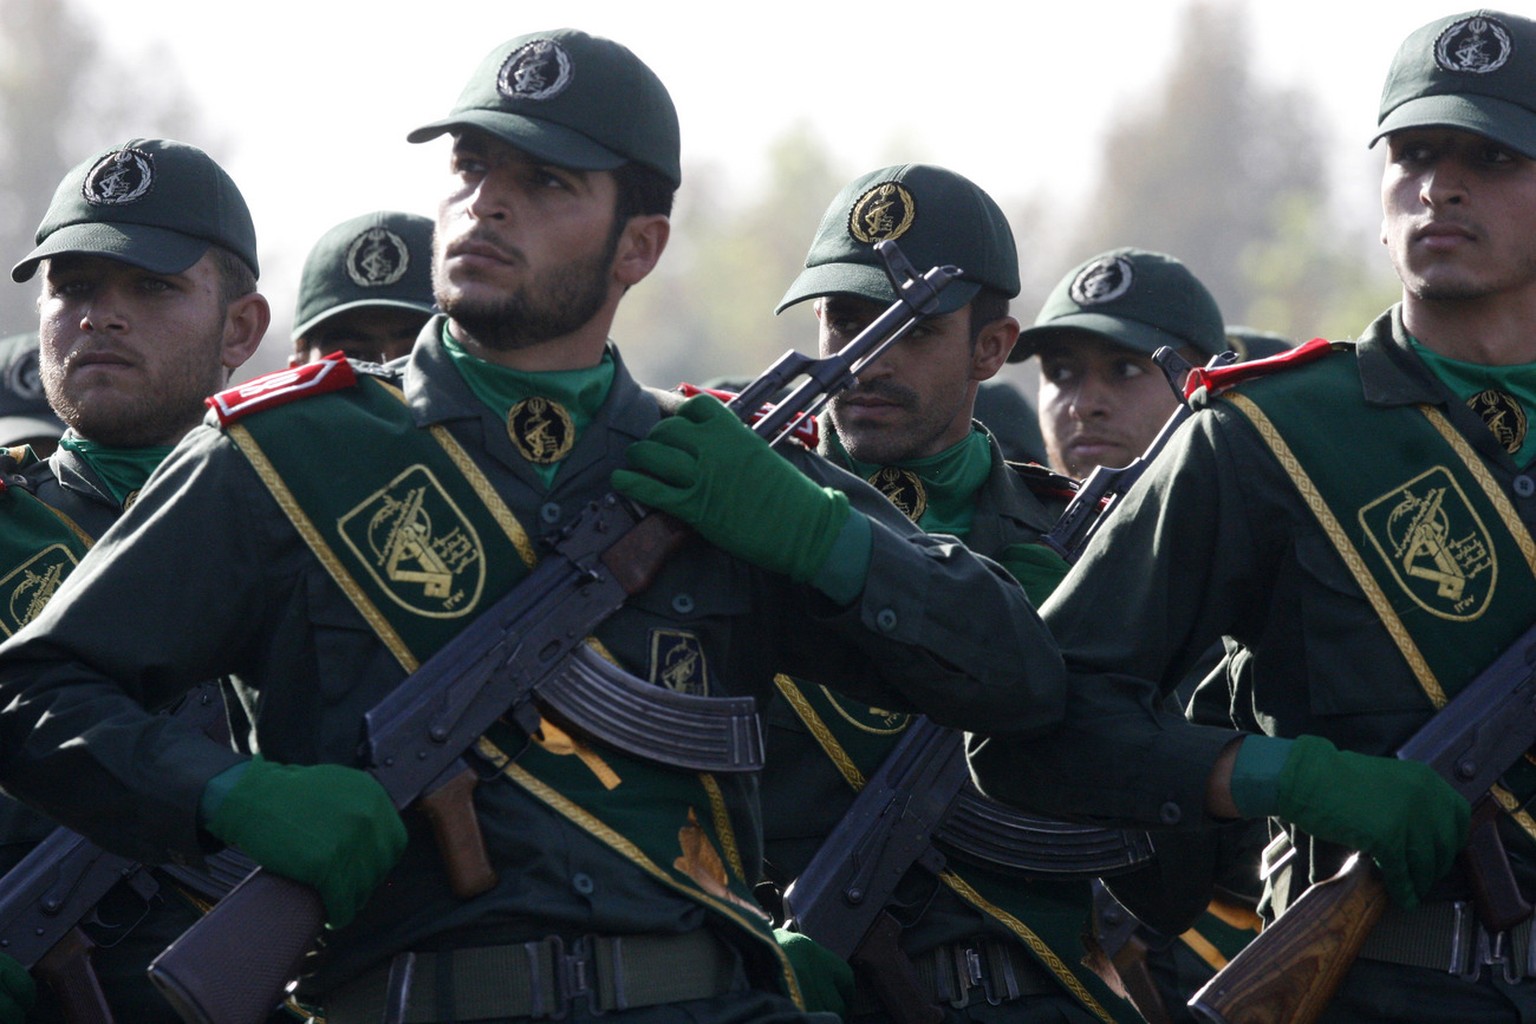 In this picture taken on Sunday, Sept. 21, 2008, Iranian Revolutionary Guards members march during a parade ceremony, marking the 28th anniversary of the onset of the Iran-Iraq war (1980-1988), in fro ...